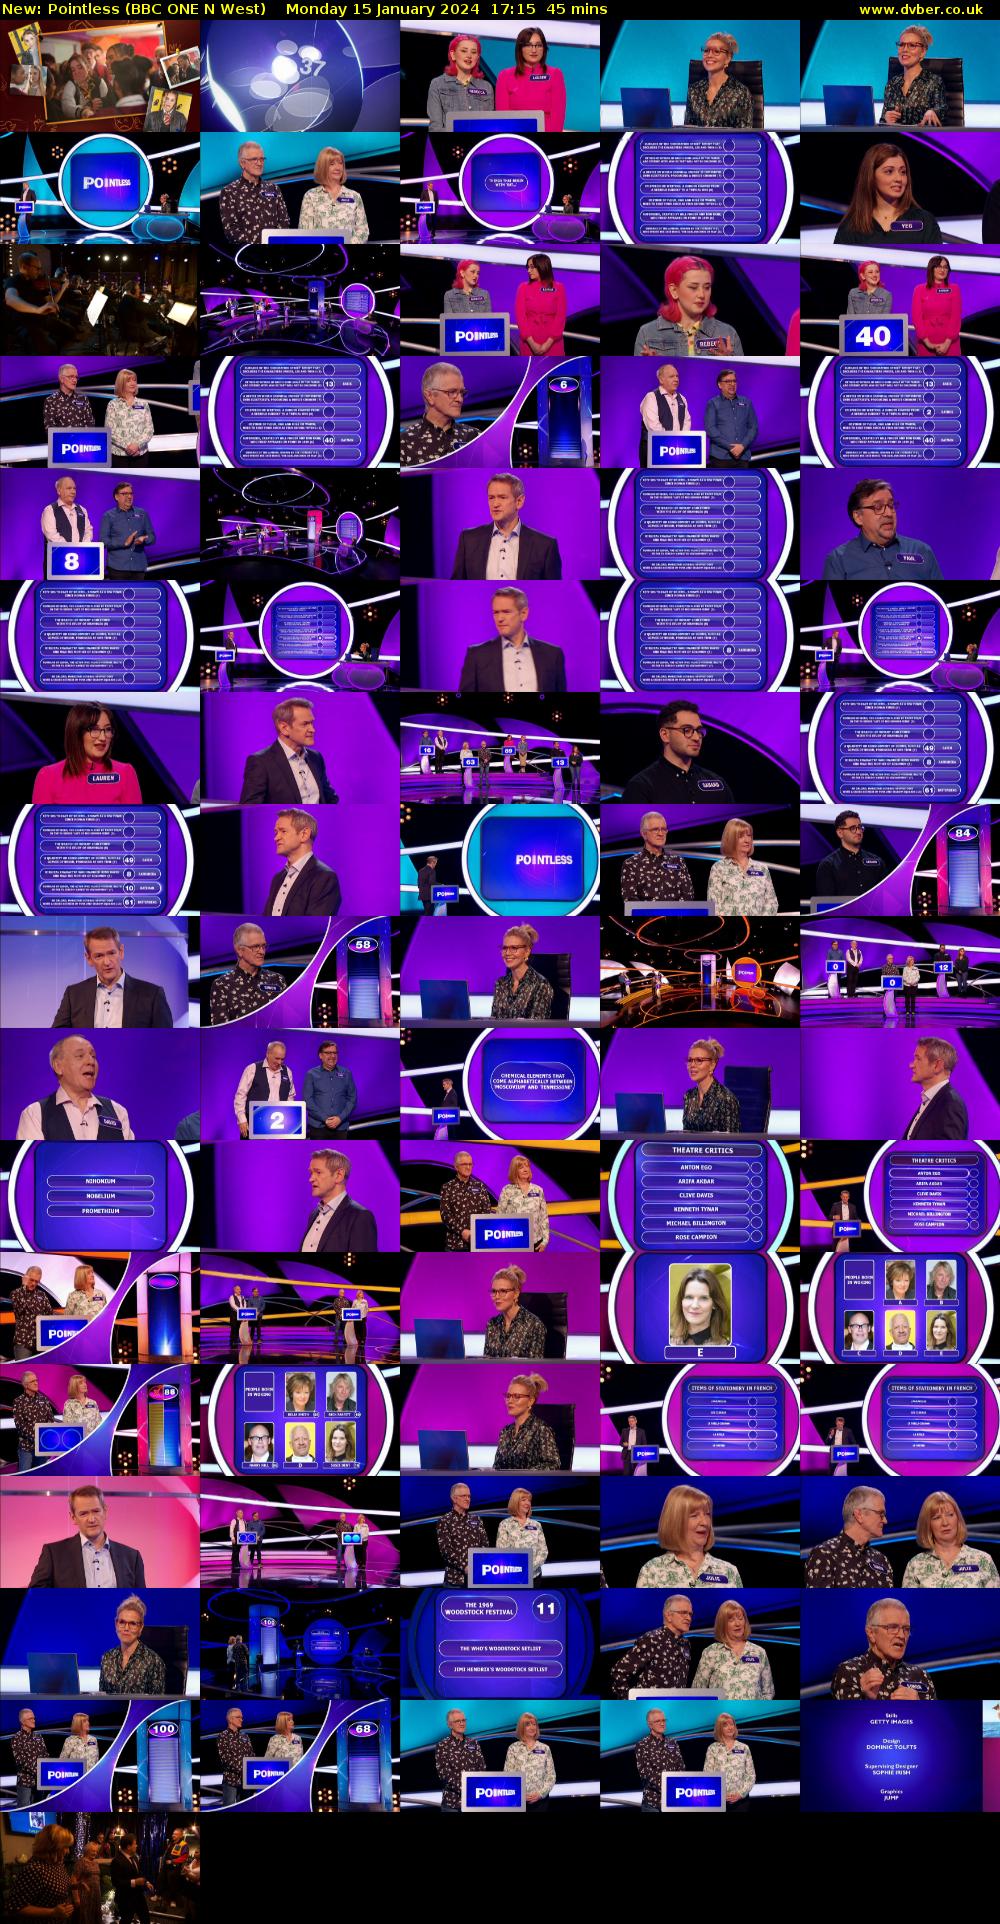 Pointless (BBC ONE N West) Monday 15 January 2024 17:15 - 18:00